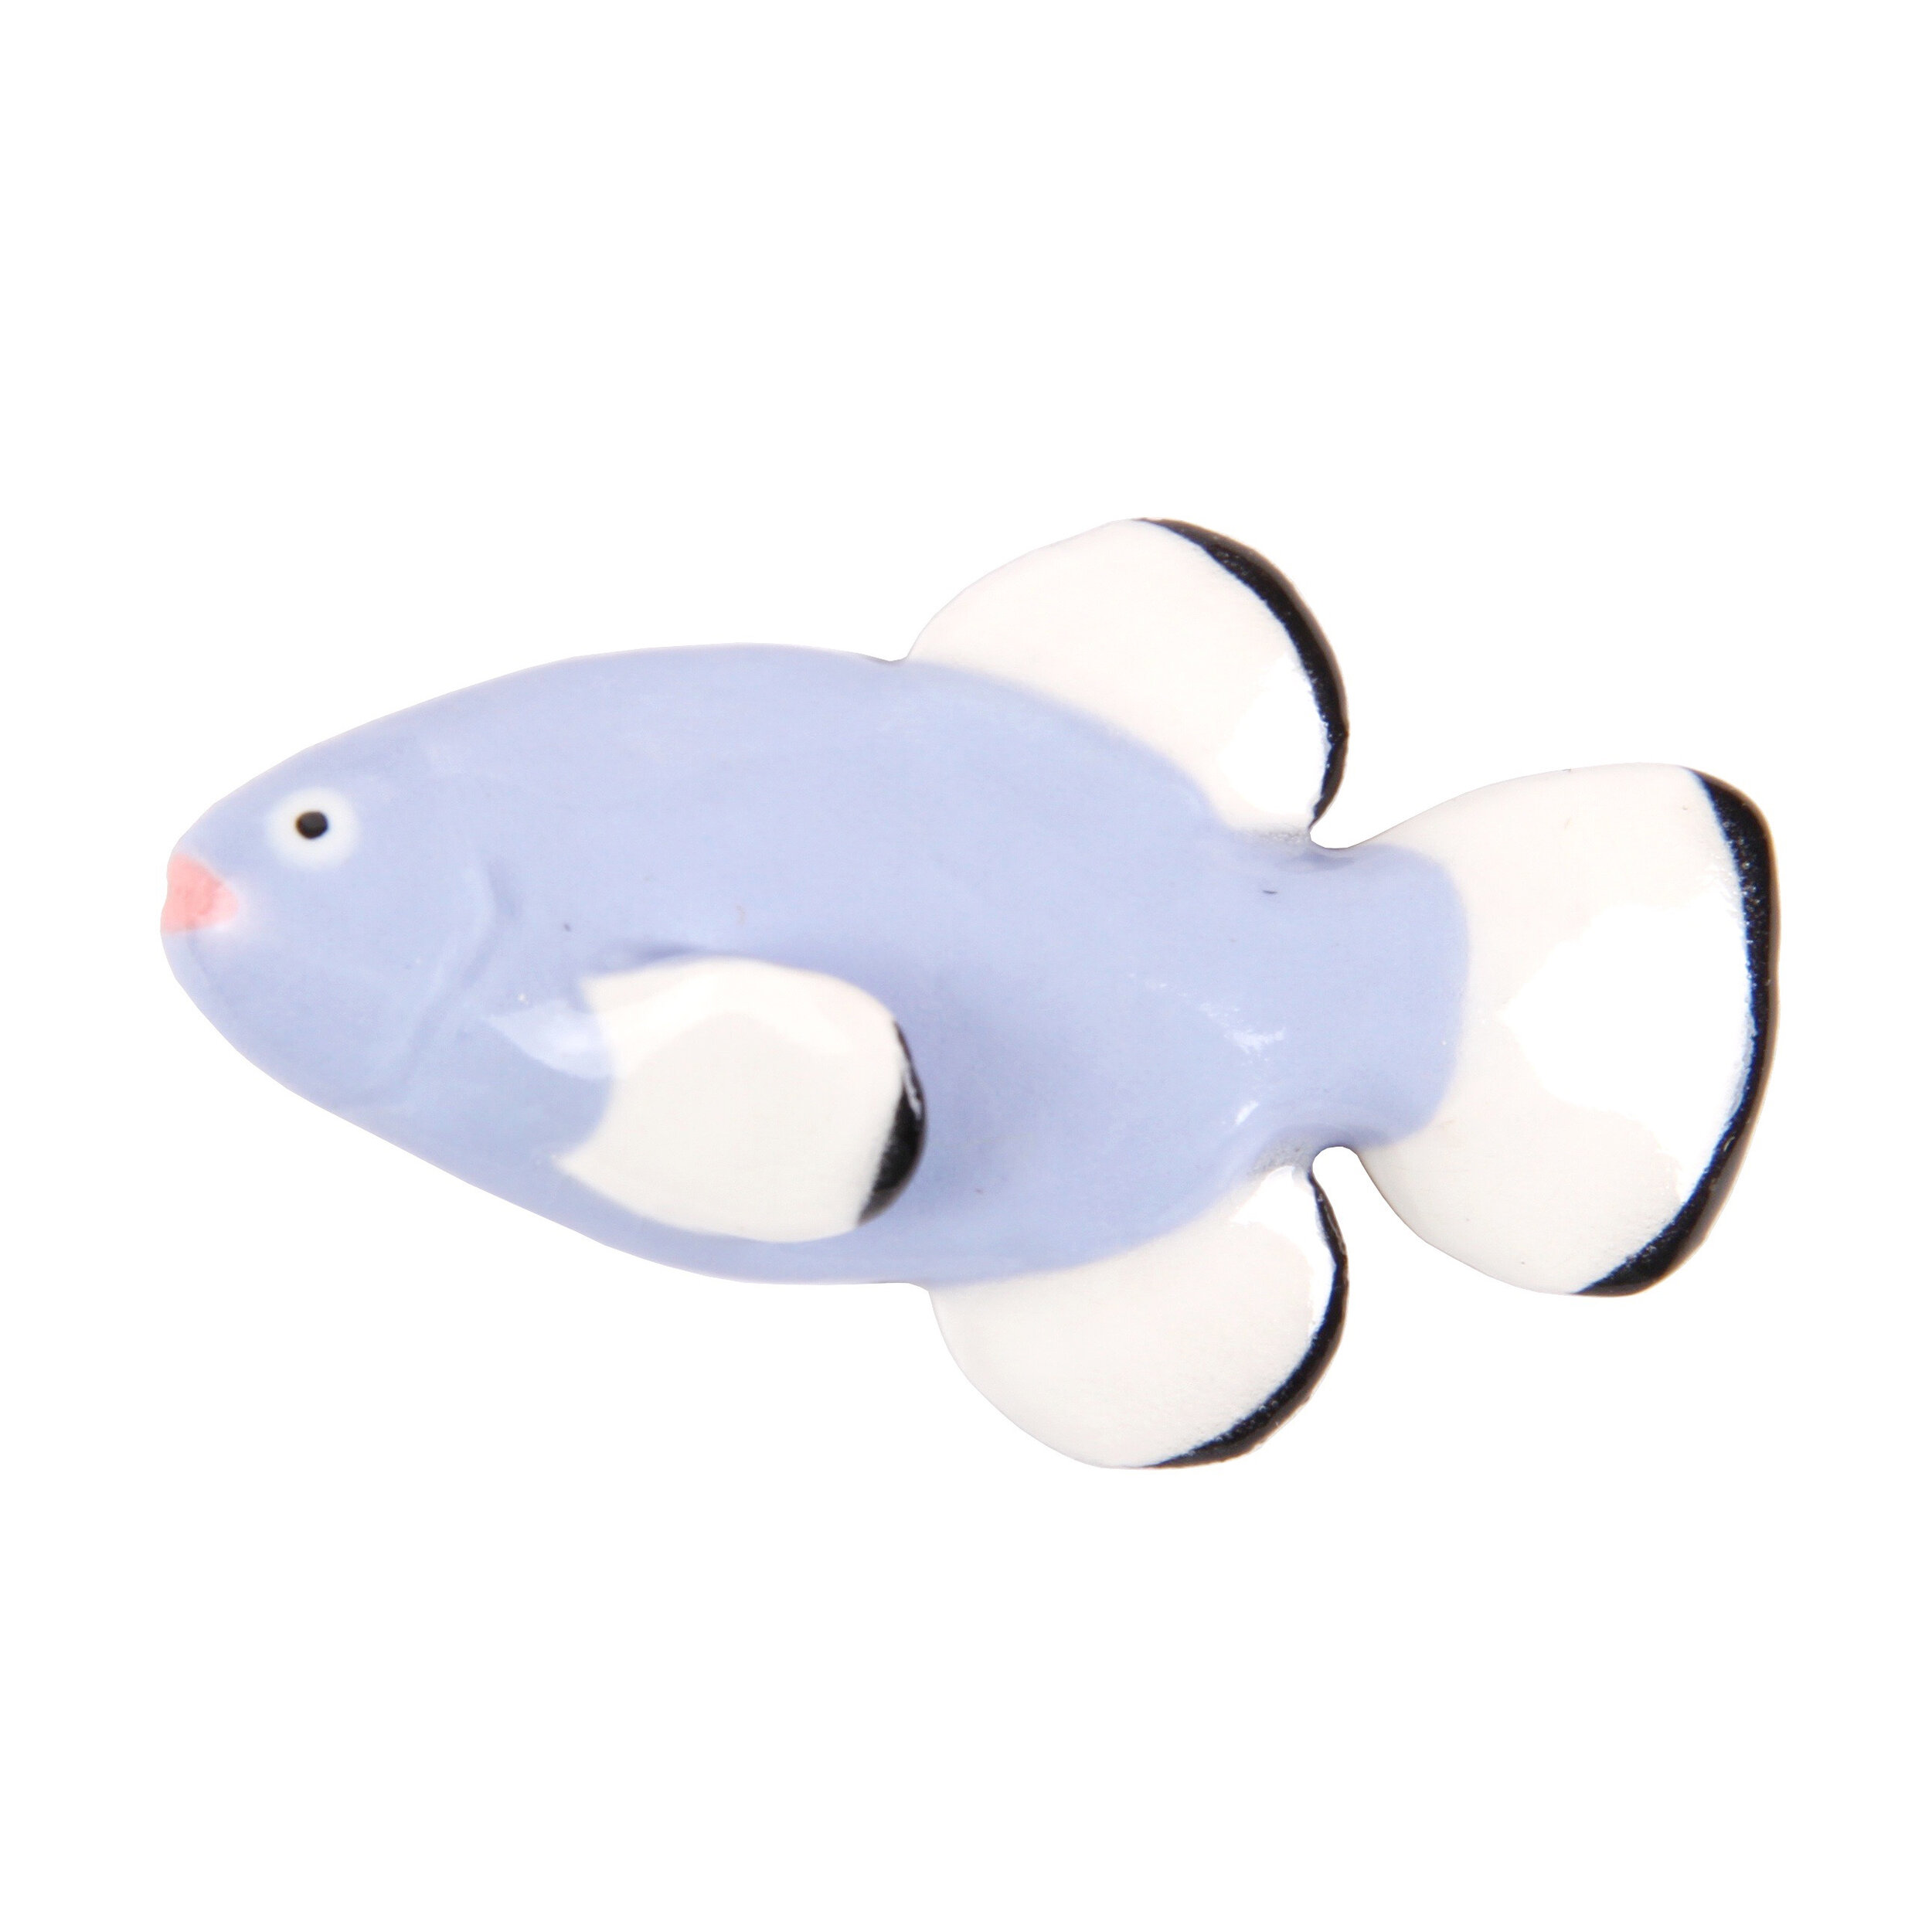 the devis hole pup fish.jpg